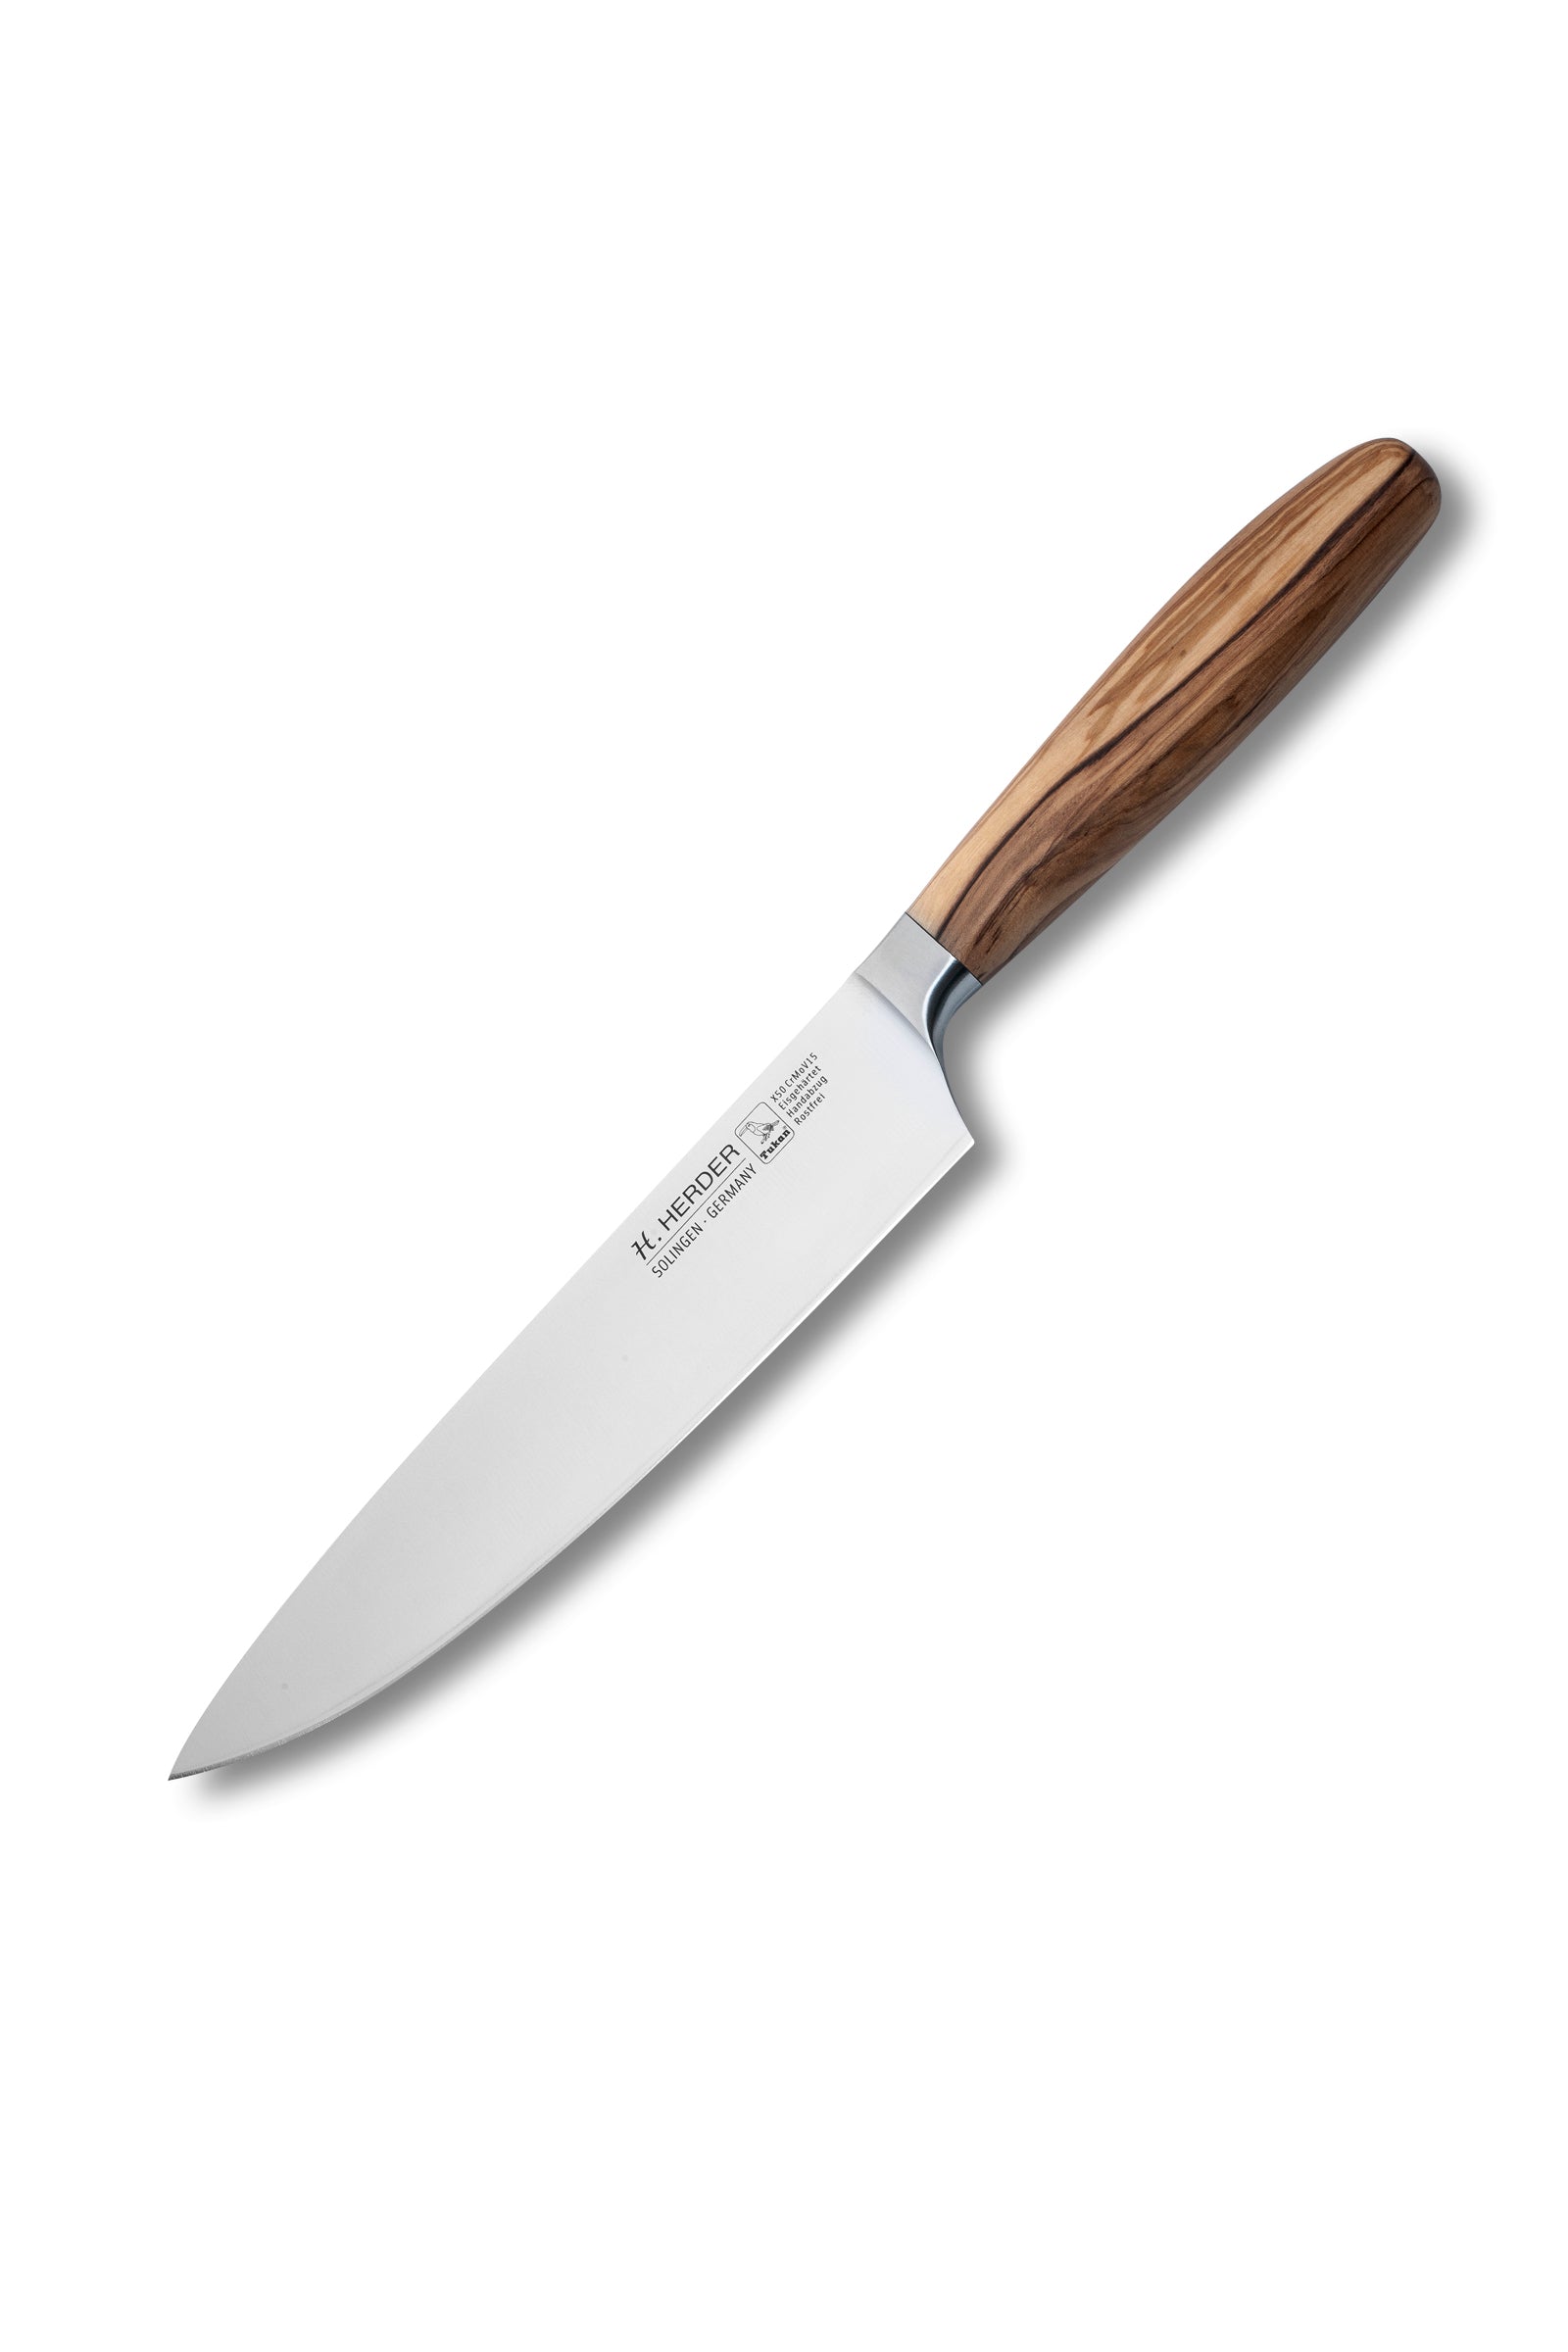 Chef's knife Eterno, olive wood, blade length 21cm, forged